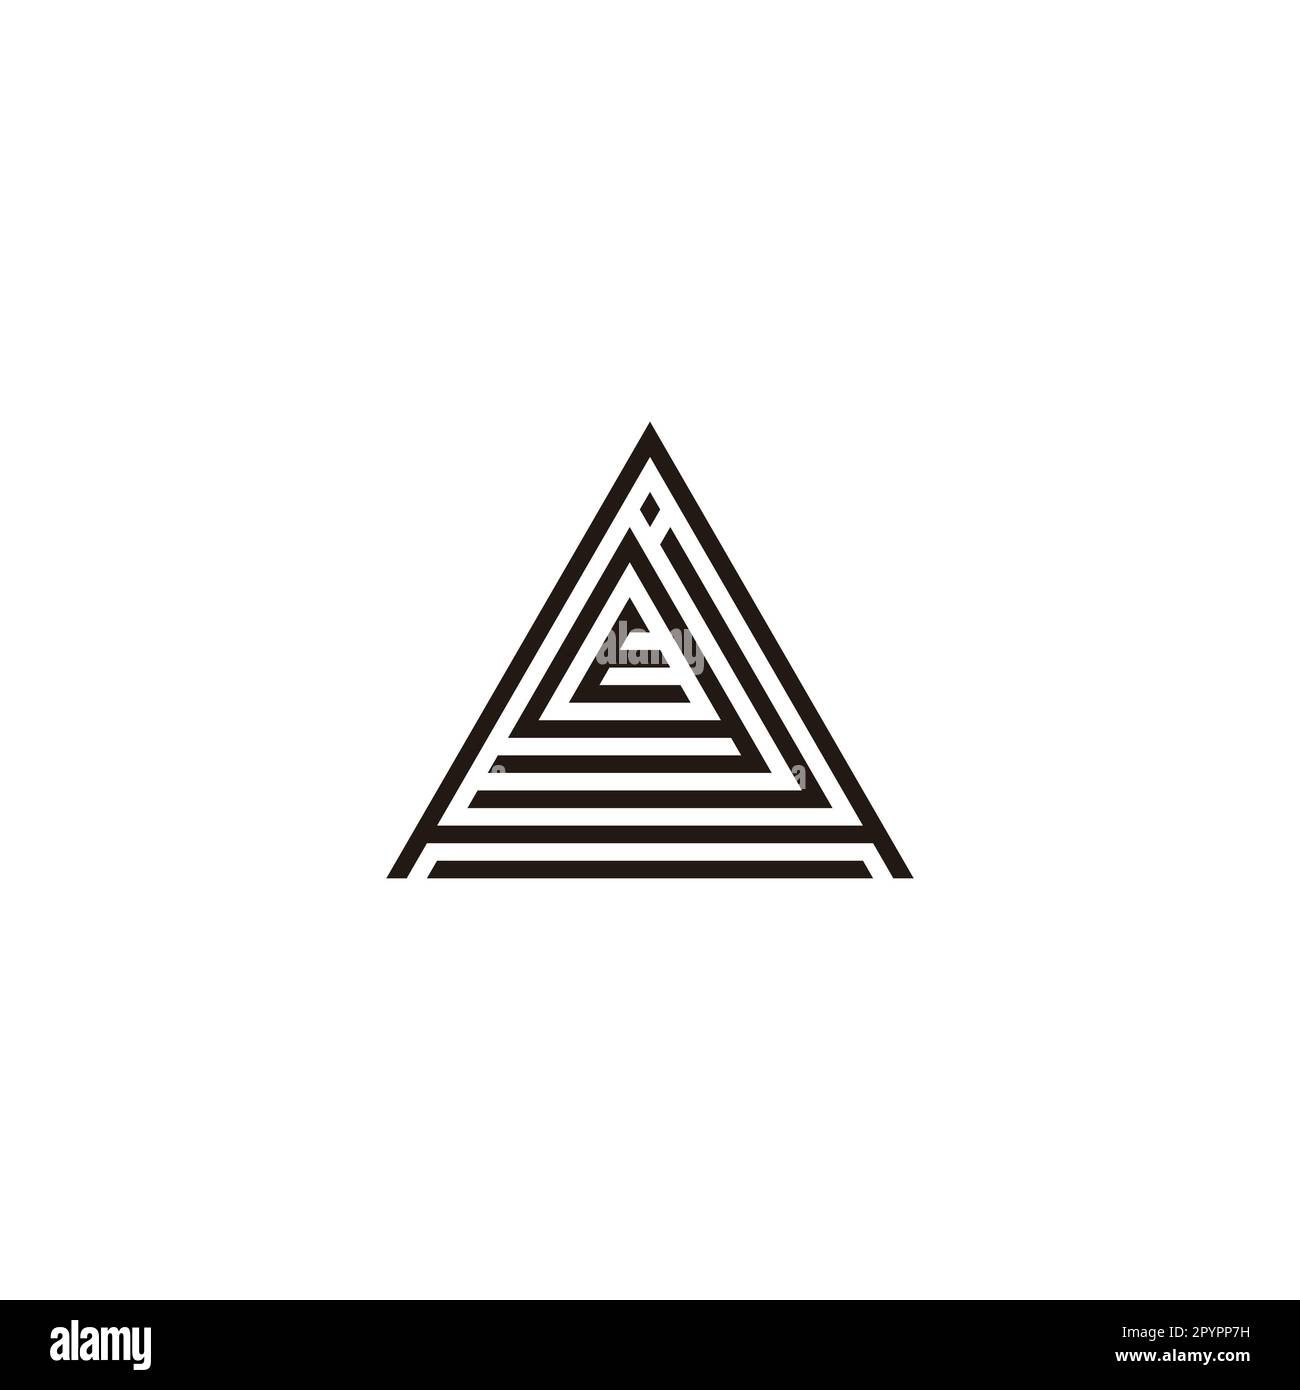 Letter A, j, g and E triangle line geometric symbol simple logo vector Stock Vector